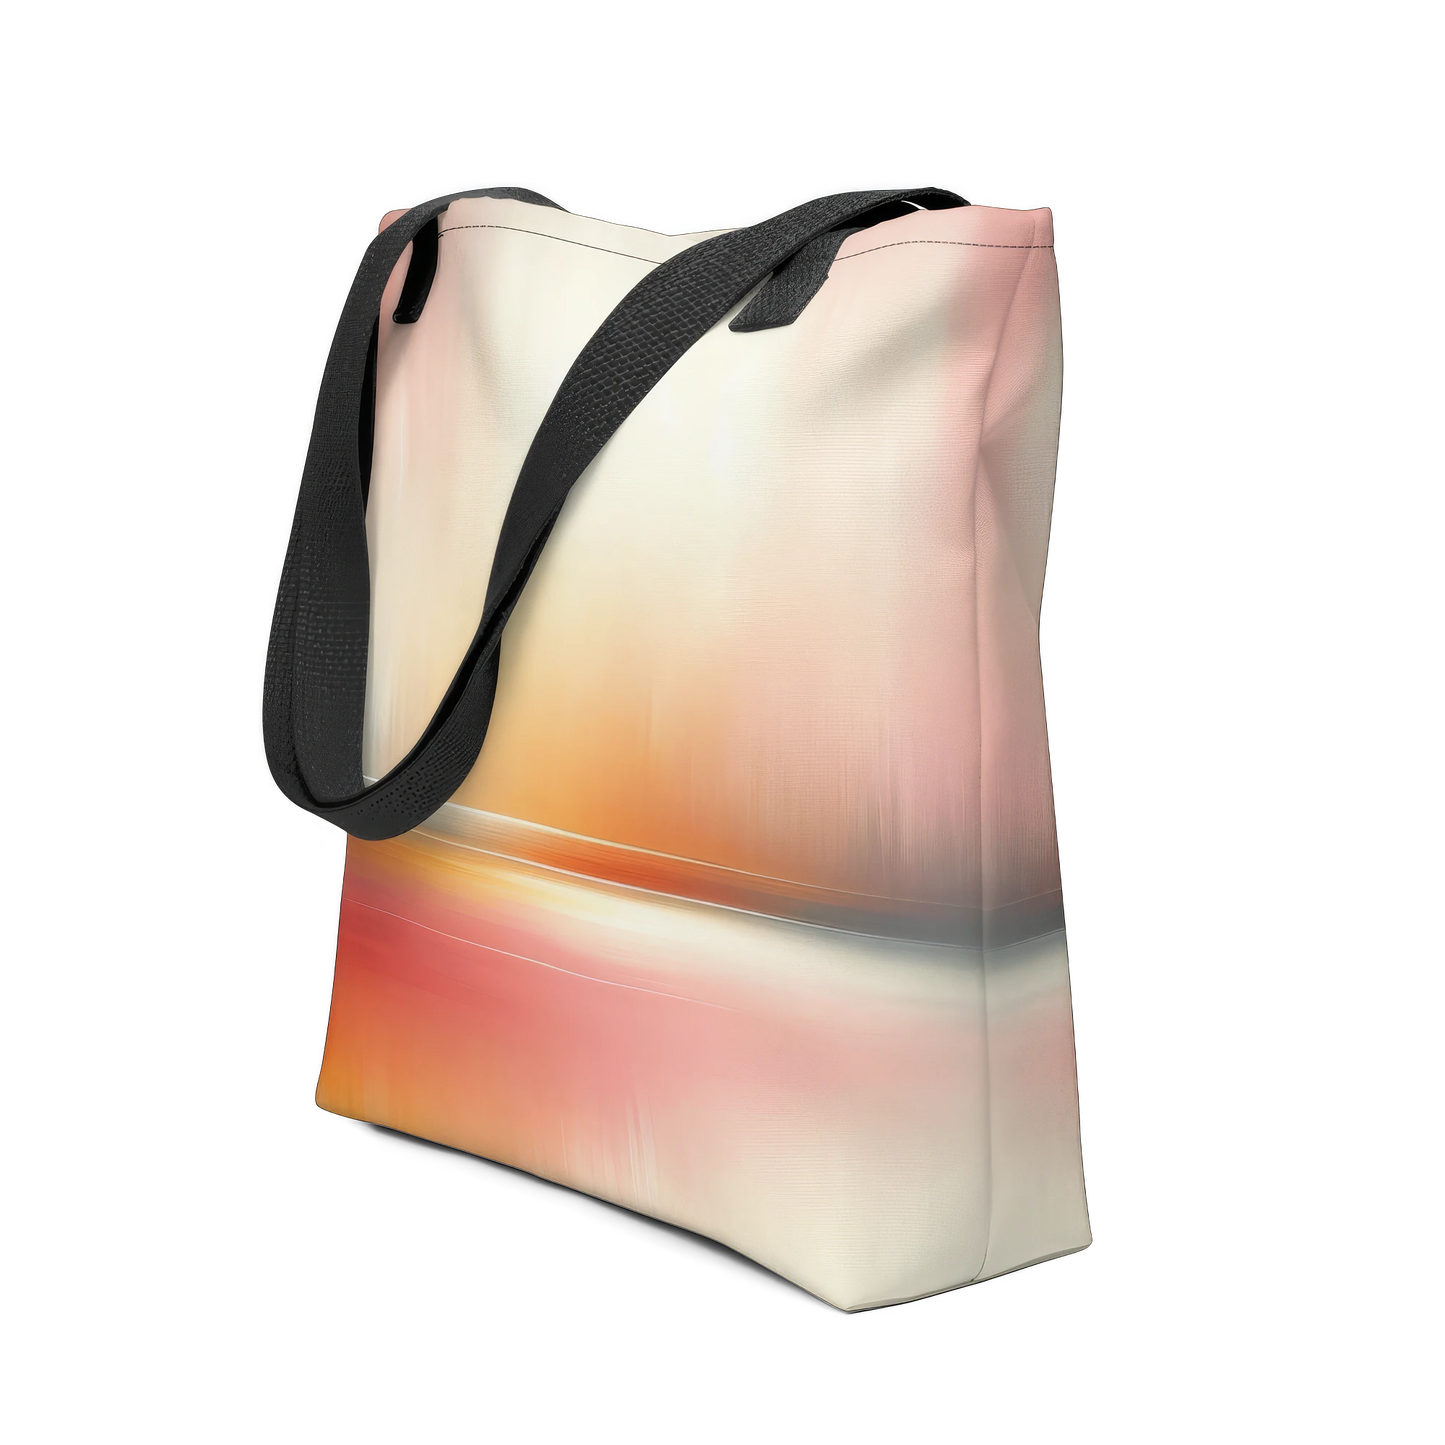 Abstract Art Tote Bag: The Serenity of Now